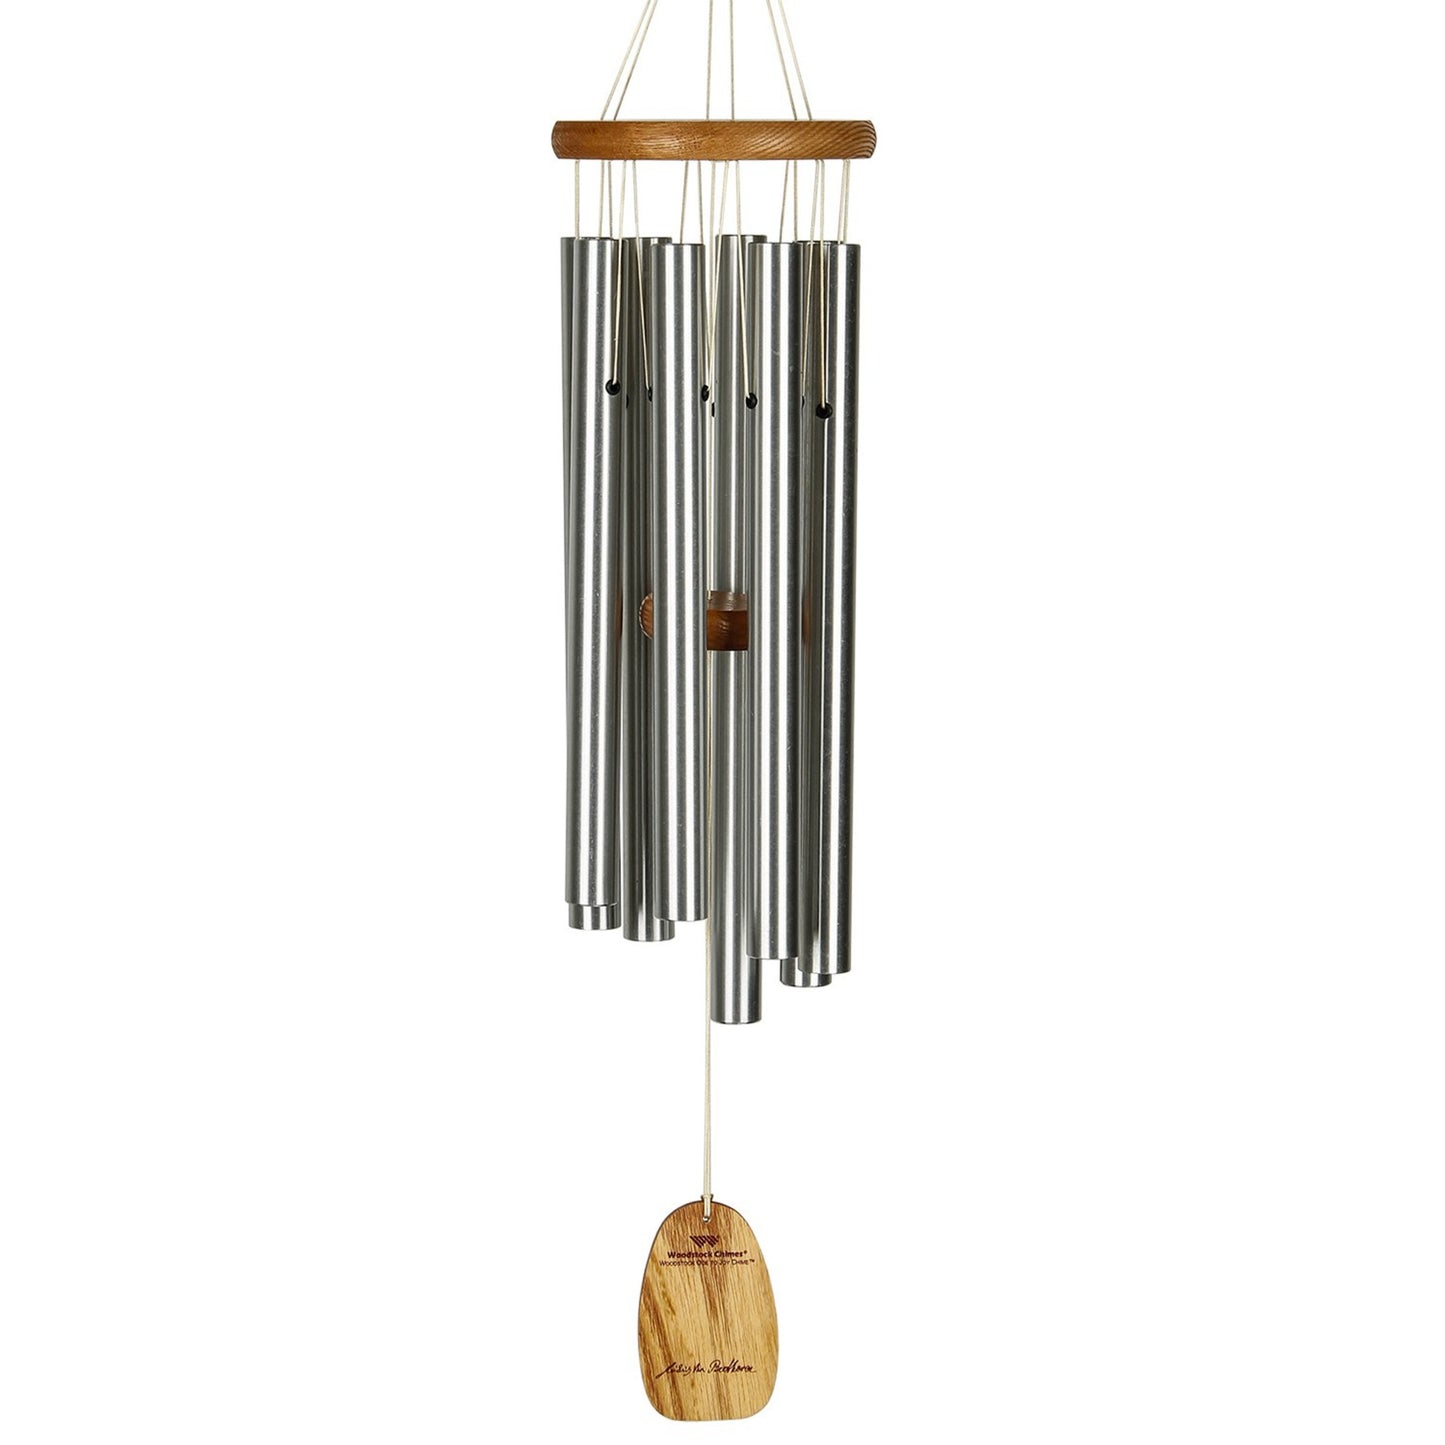 Beethoven Wind Chimes